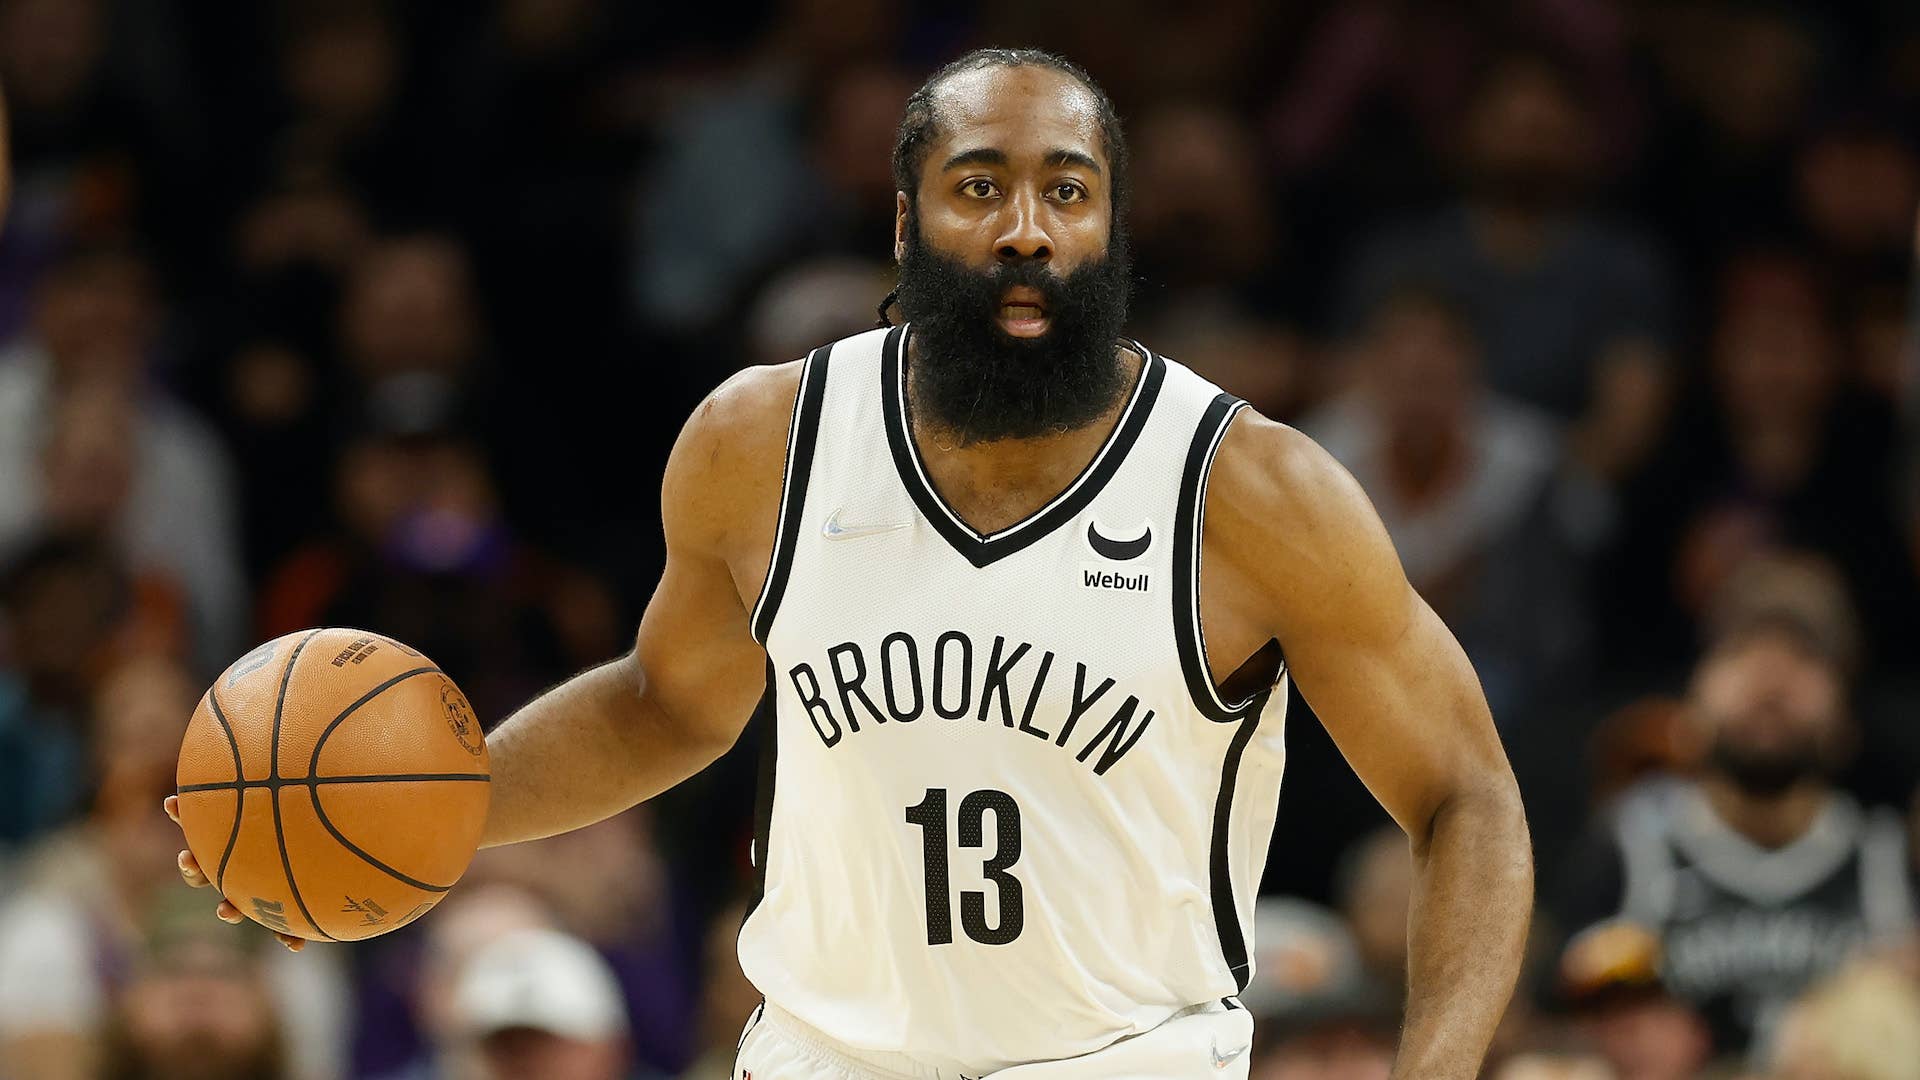 James Harden #13 of the Brooklyn Nets handles the ball.